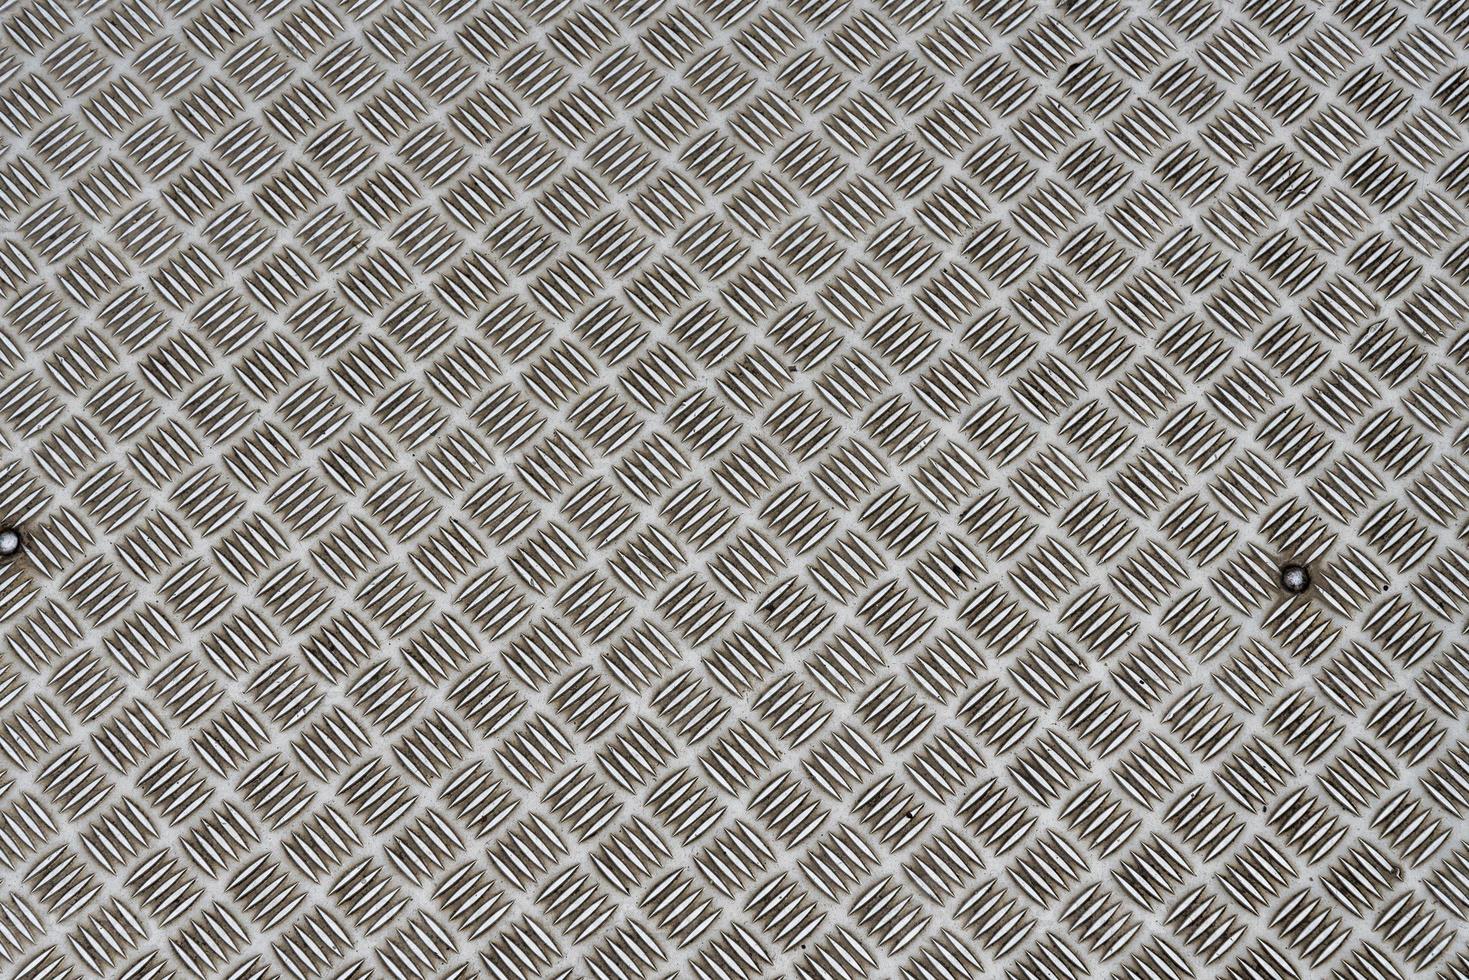 Used cellular steel plates background, metal texture. photo